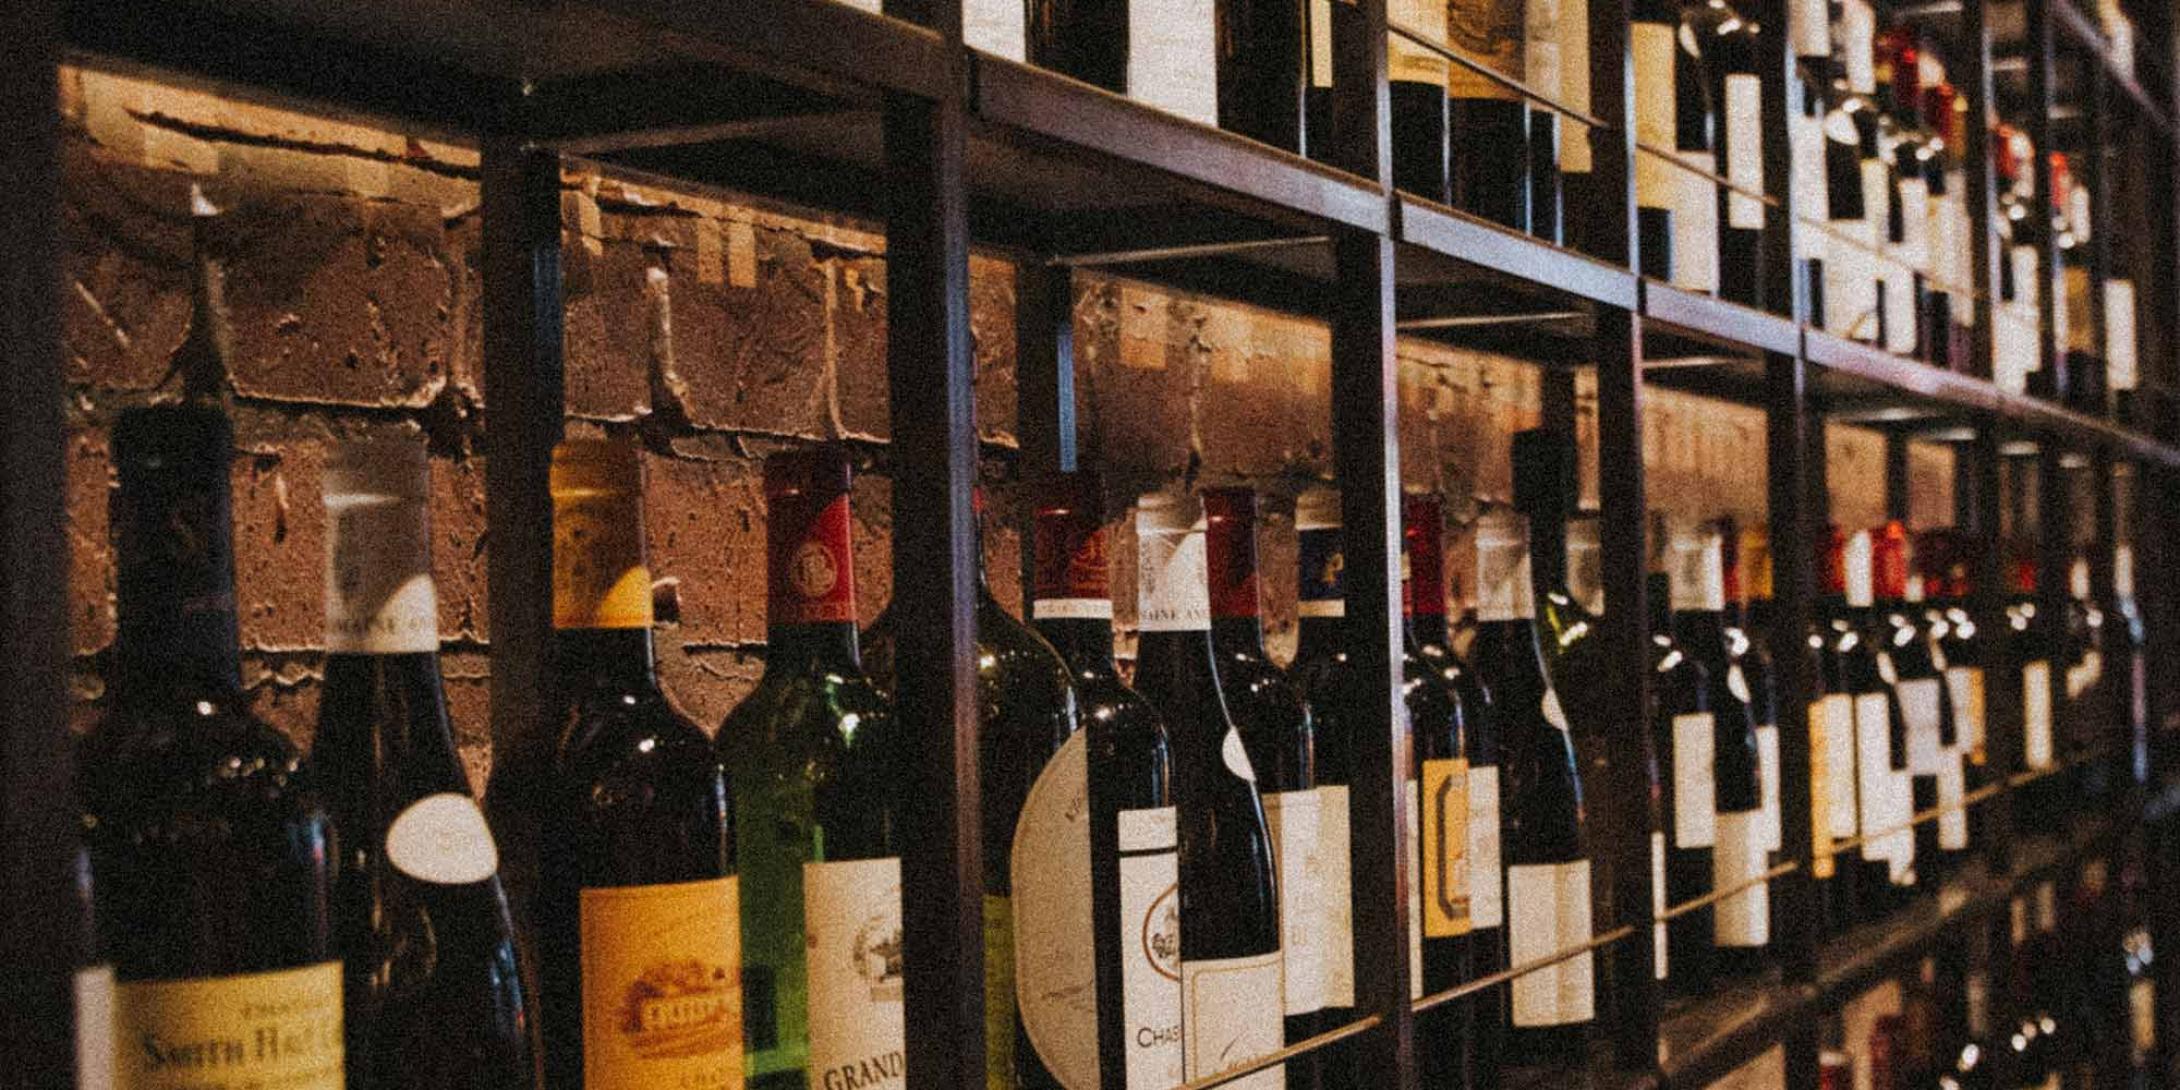 Shelves filled with bottles of wine